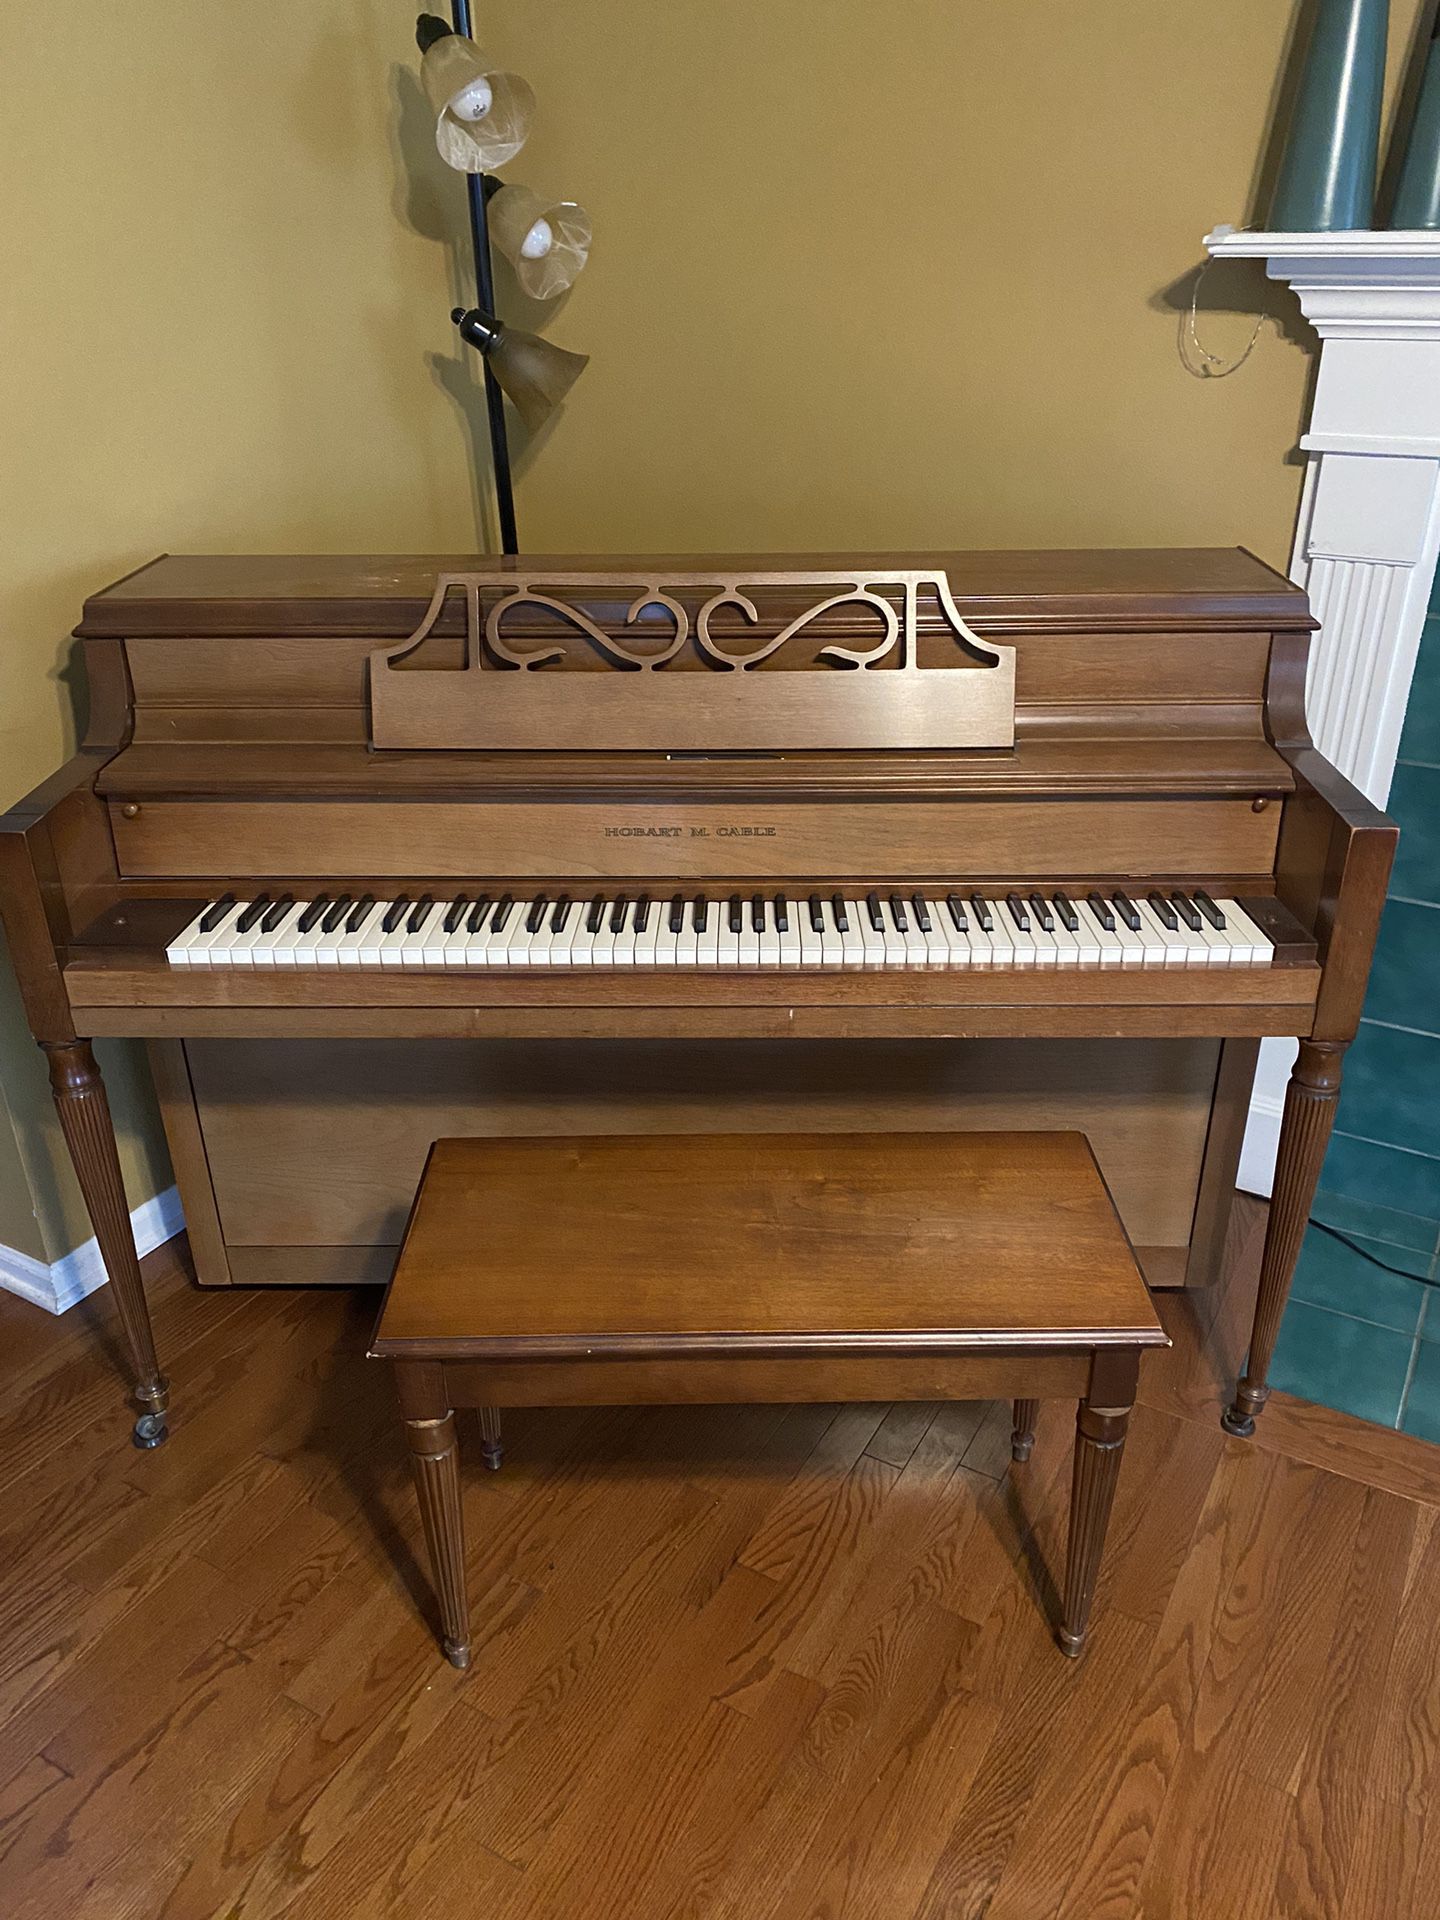 Hobart M cable piano